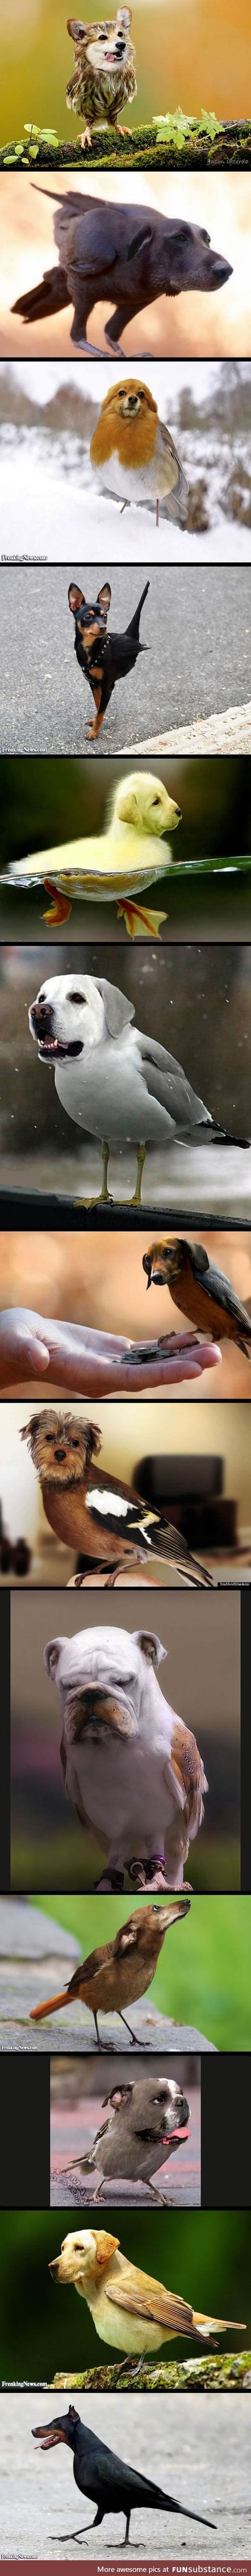 Dogs + birds = this